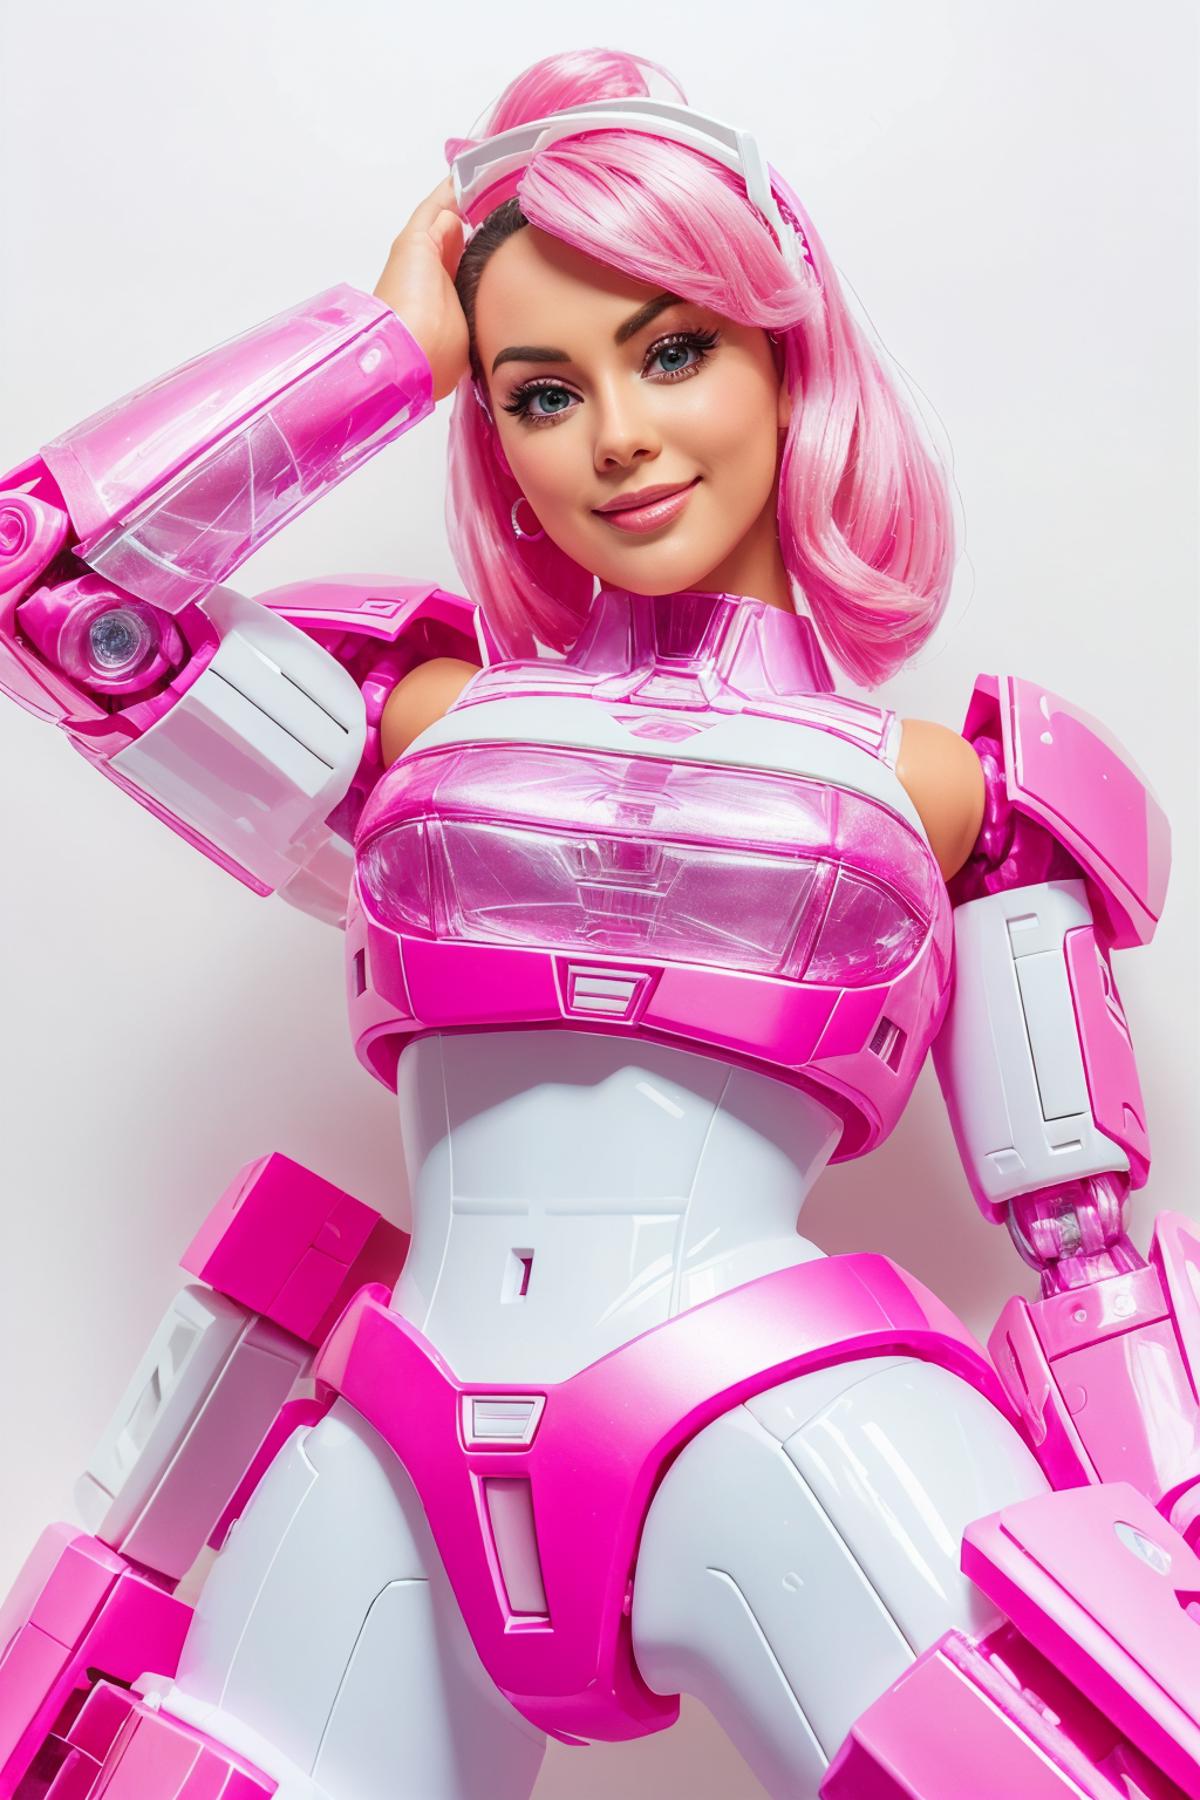 Barbiecore - Barbify Anything! image